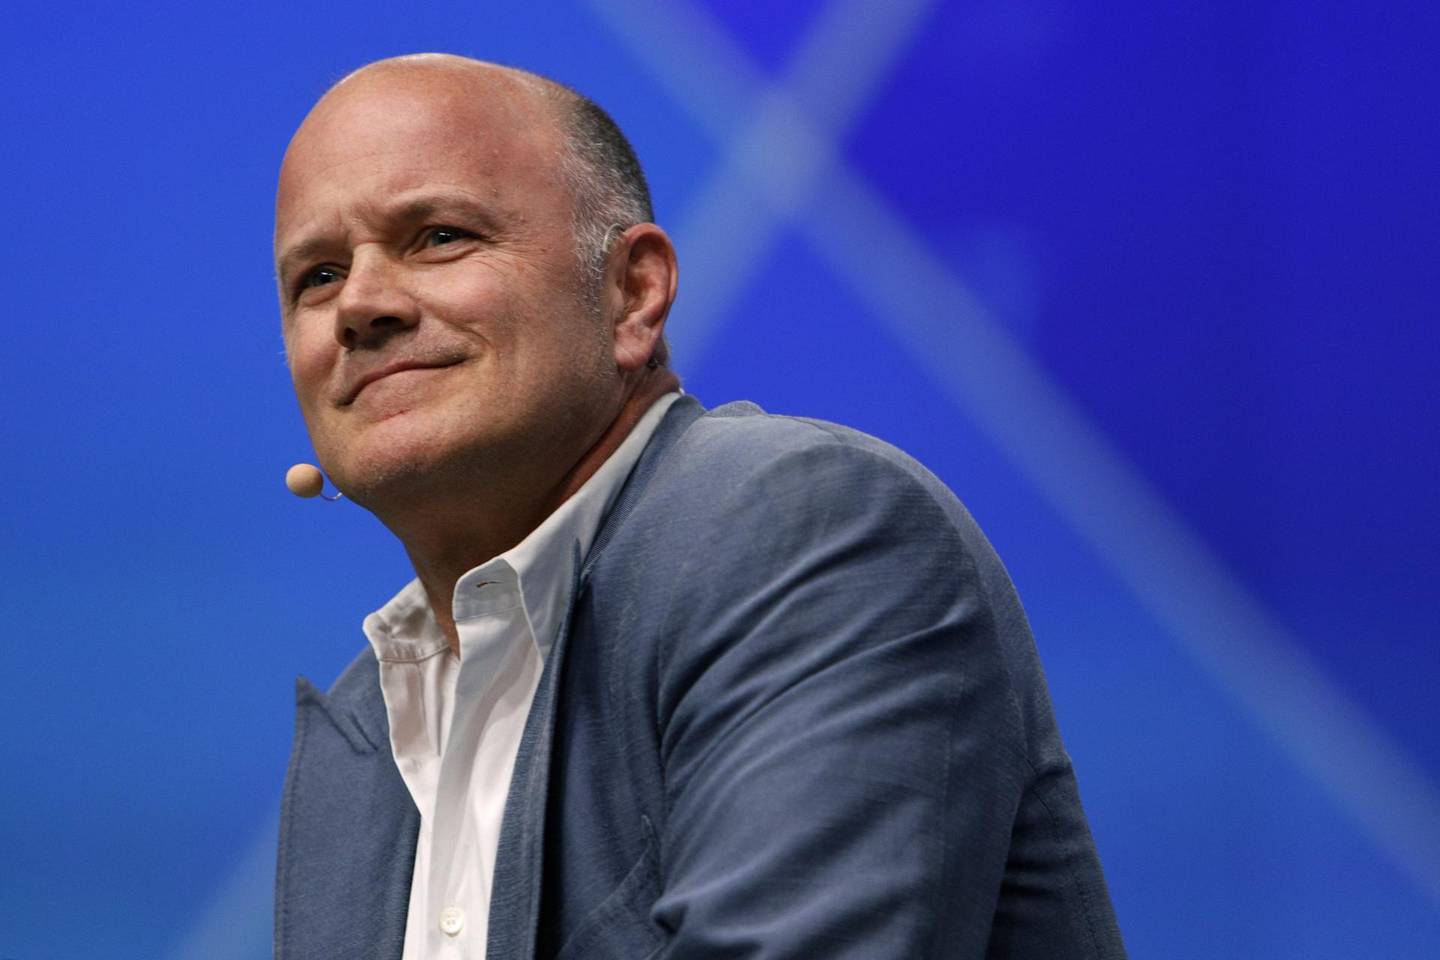 Mike Novogratz, founder and chief executive officer of Galaxy Investment Partners LLC, smiles during the Skybridge Alternatives (SALT) conference in Las Vegas, Nevada, U.S., on Wednesday, May 8, 2019. SALT brings together investors, policy experts, politicians and business leaders to network and share ideas to unlock growth opportunities in finance, economics, entrepreneurship, public policy, technology and philanthropy. Photographer: Joe Buglewicz/Bloomberg